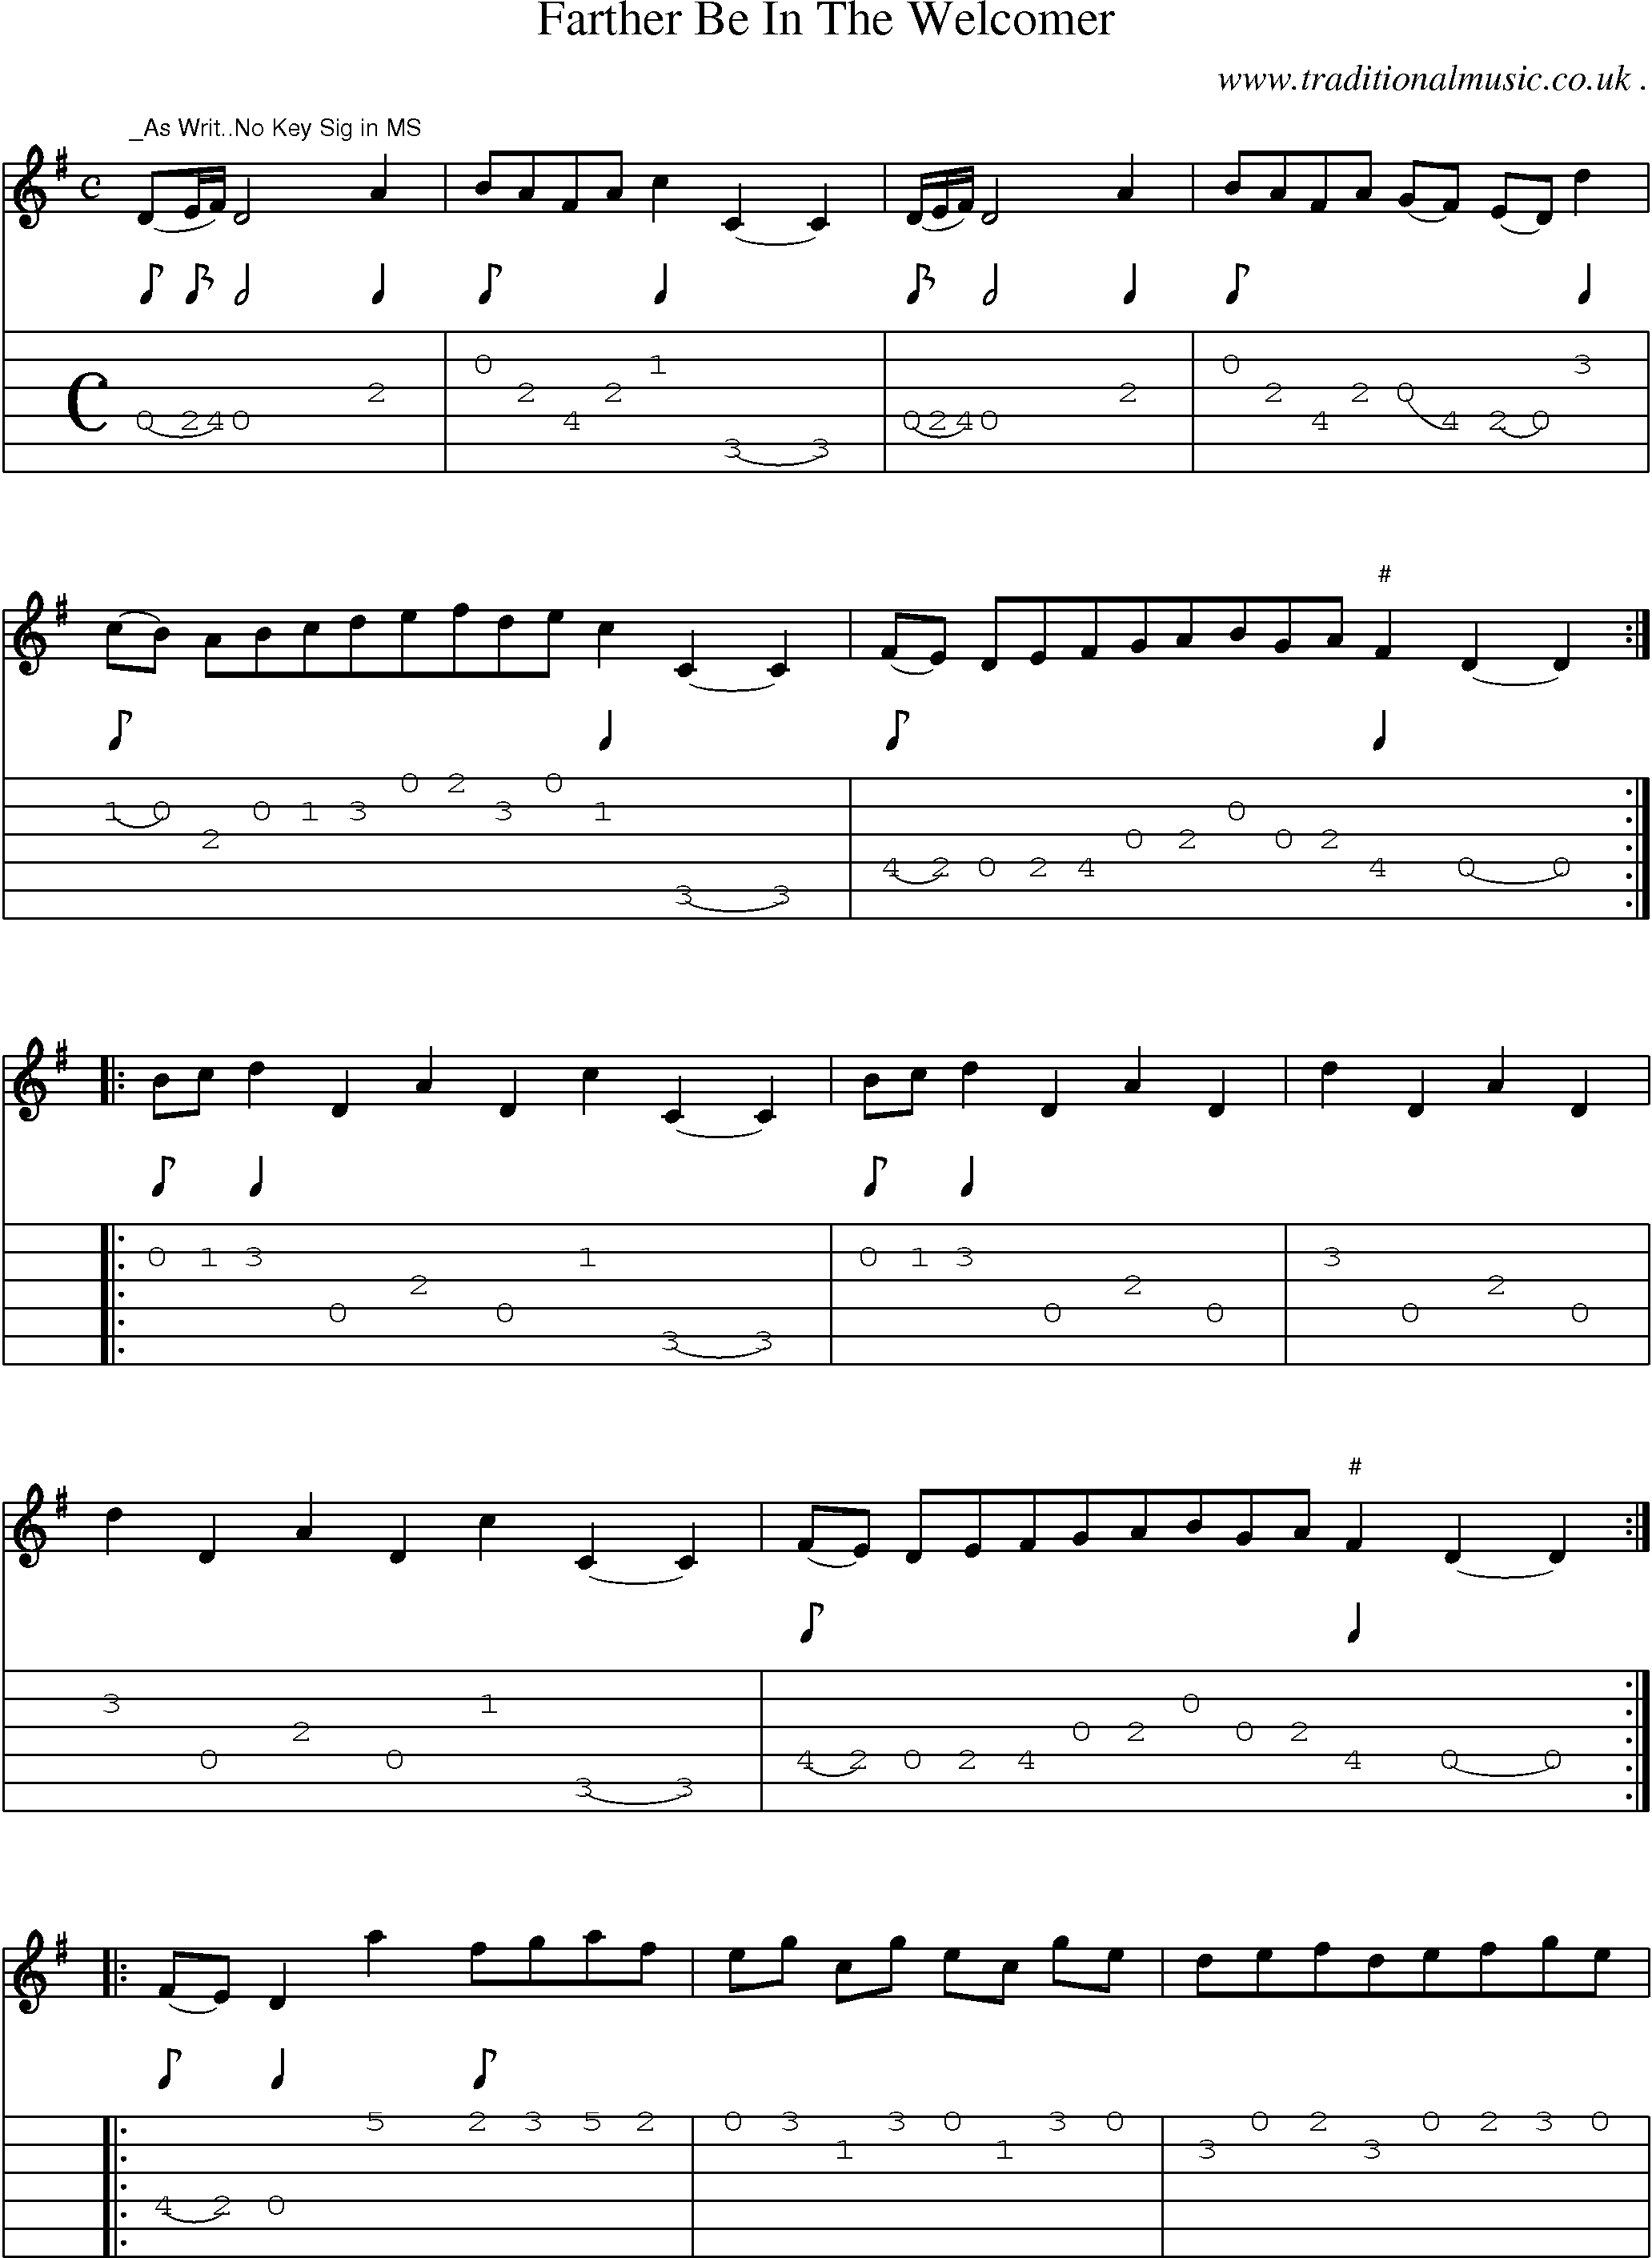 Sheet-Music and Guitar Tabs for Farther Be In The Welcomer